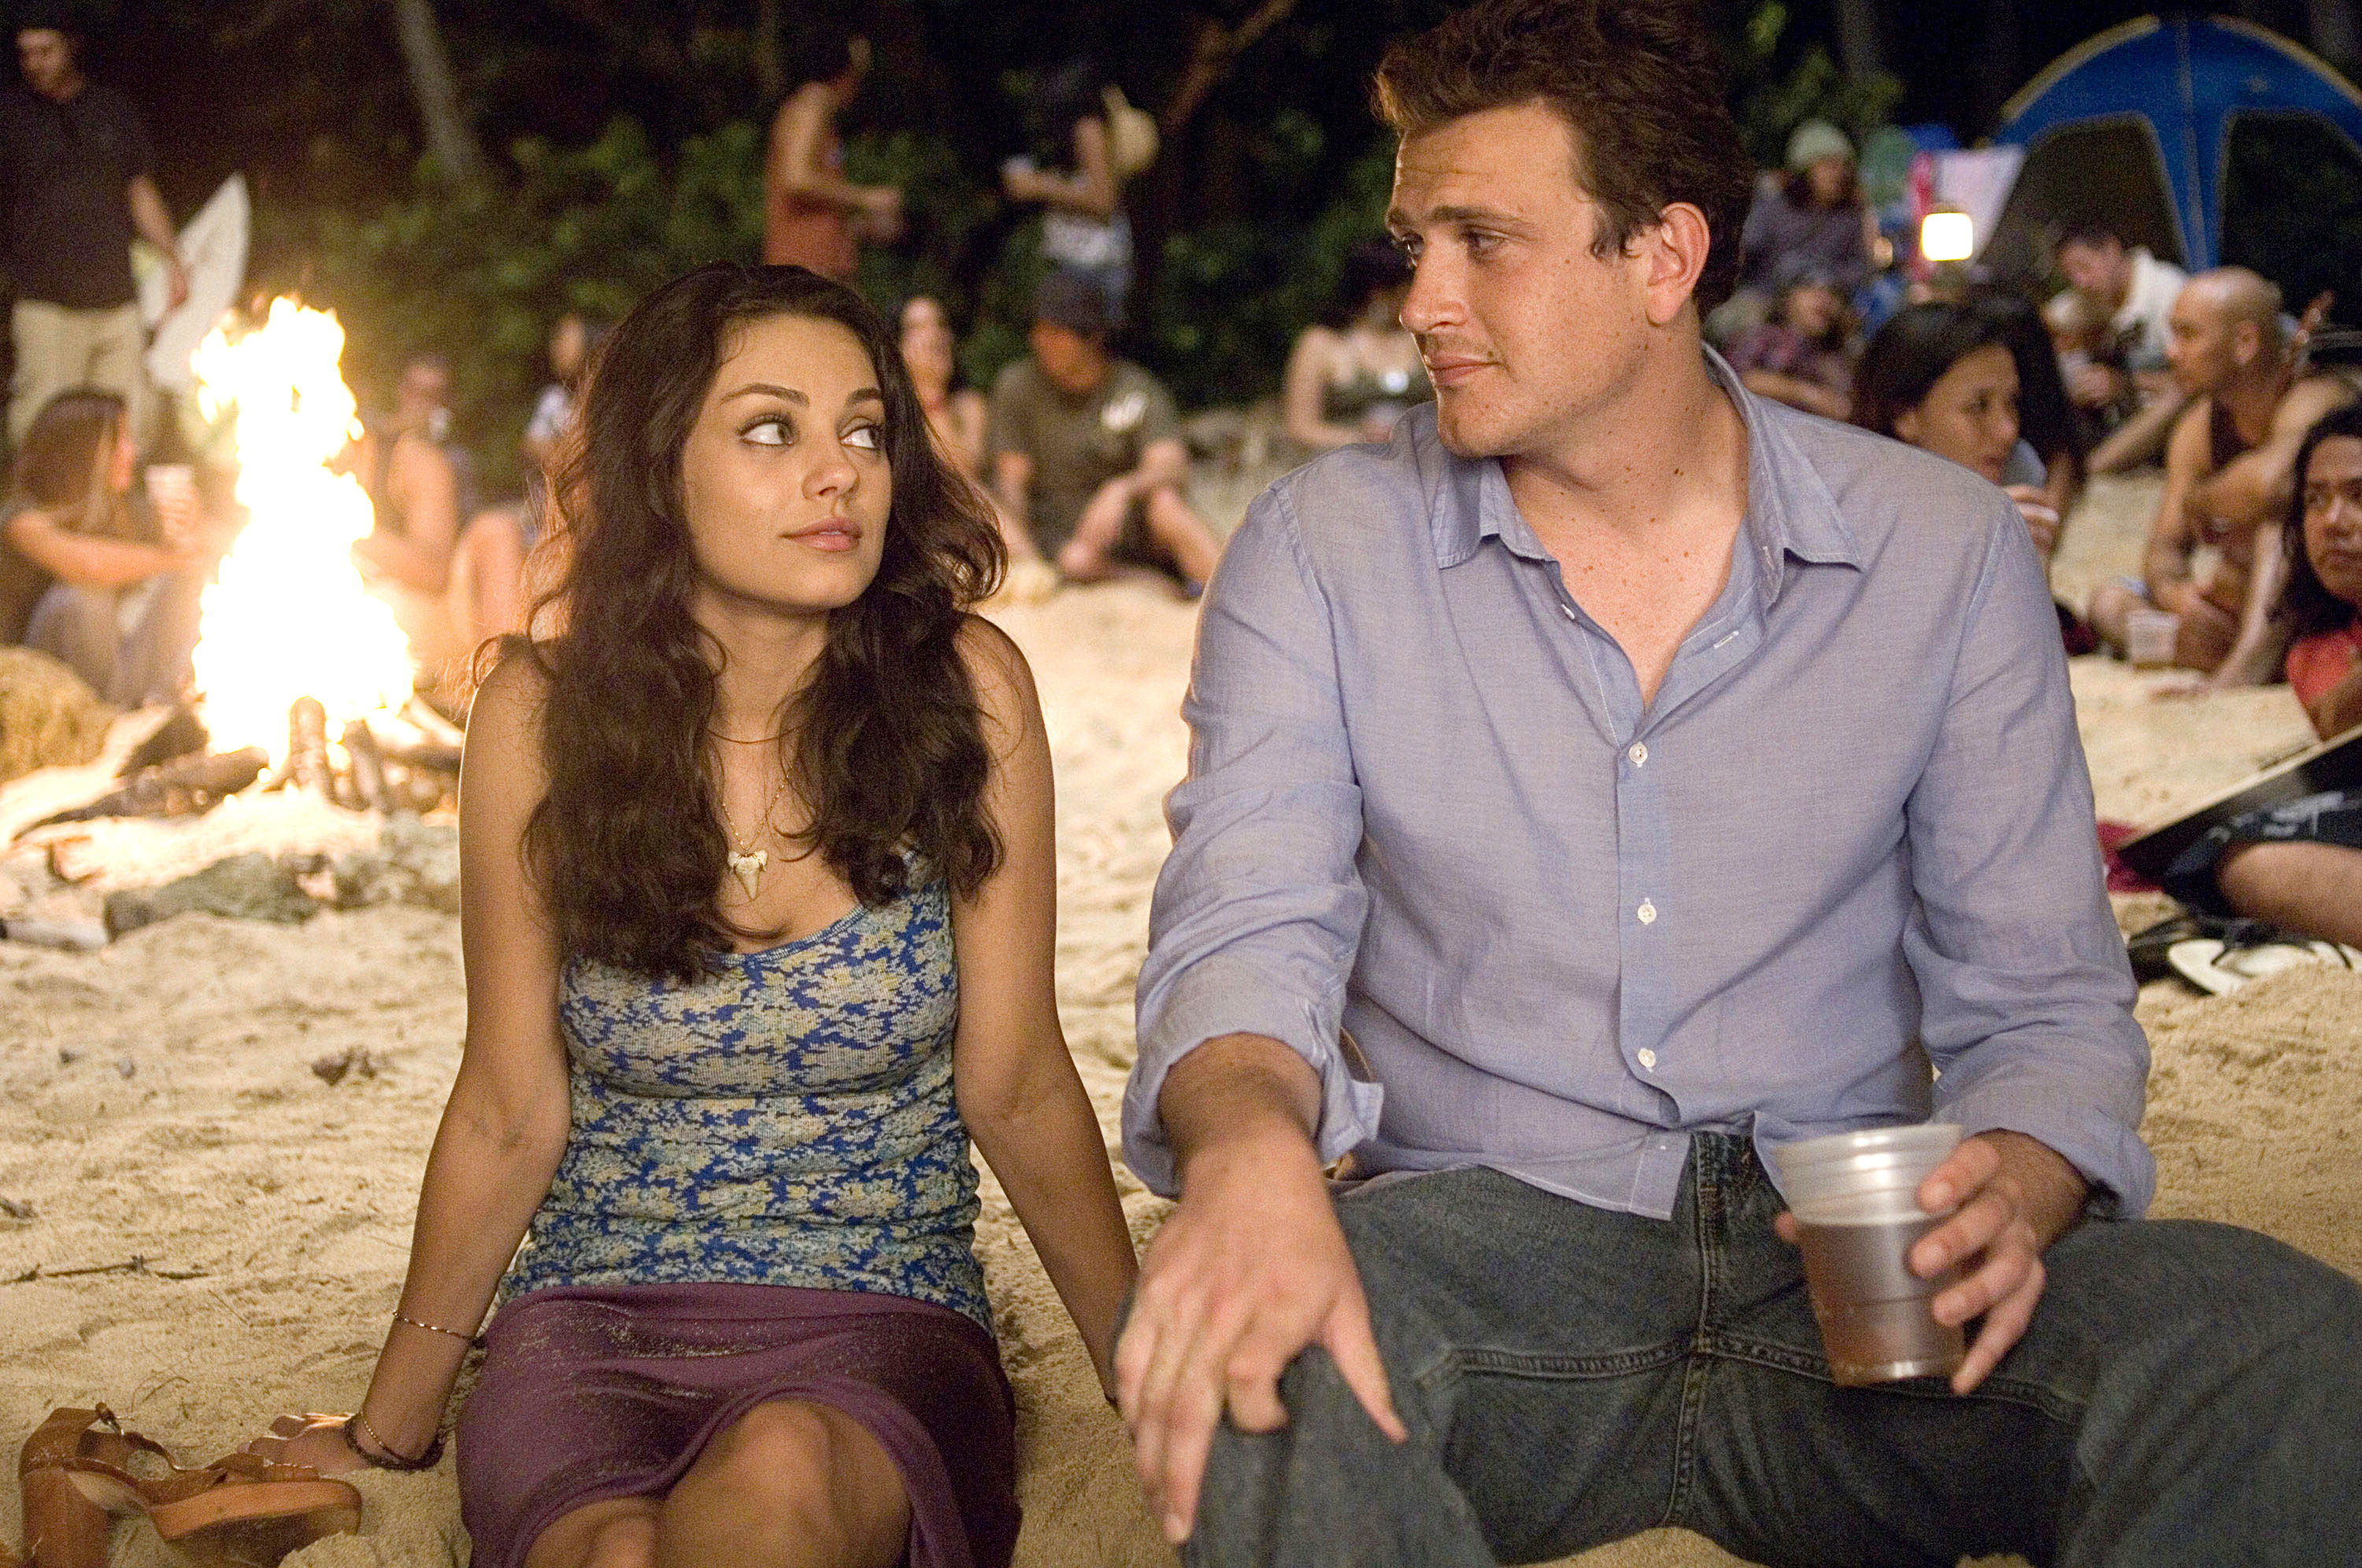 Mila Kunis and Jason Segel sitting by a campfire on a beach in a scene from a movie